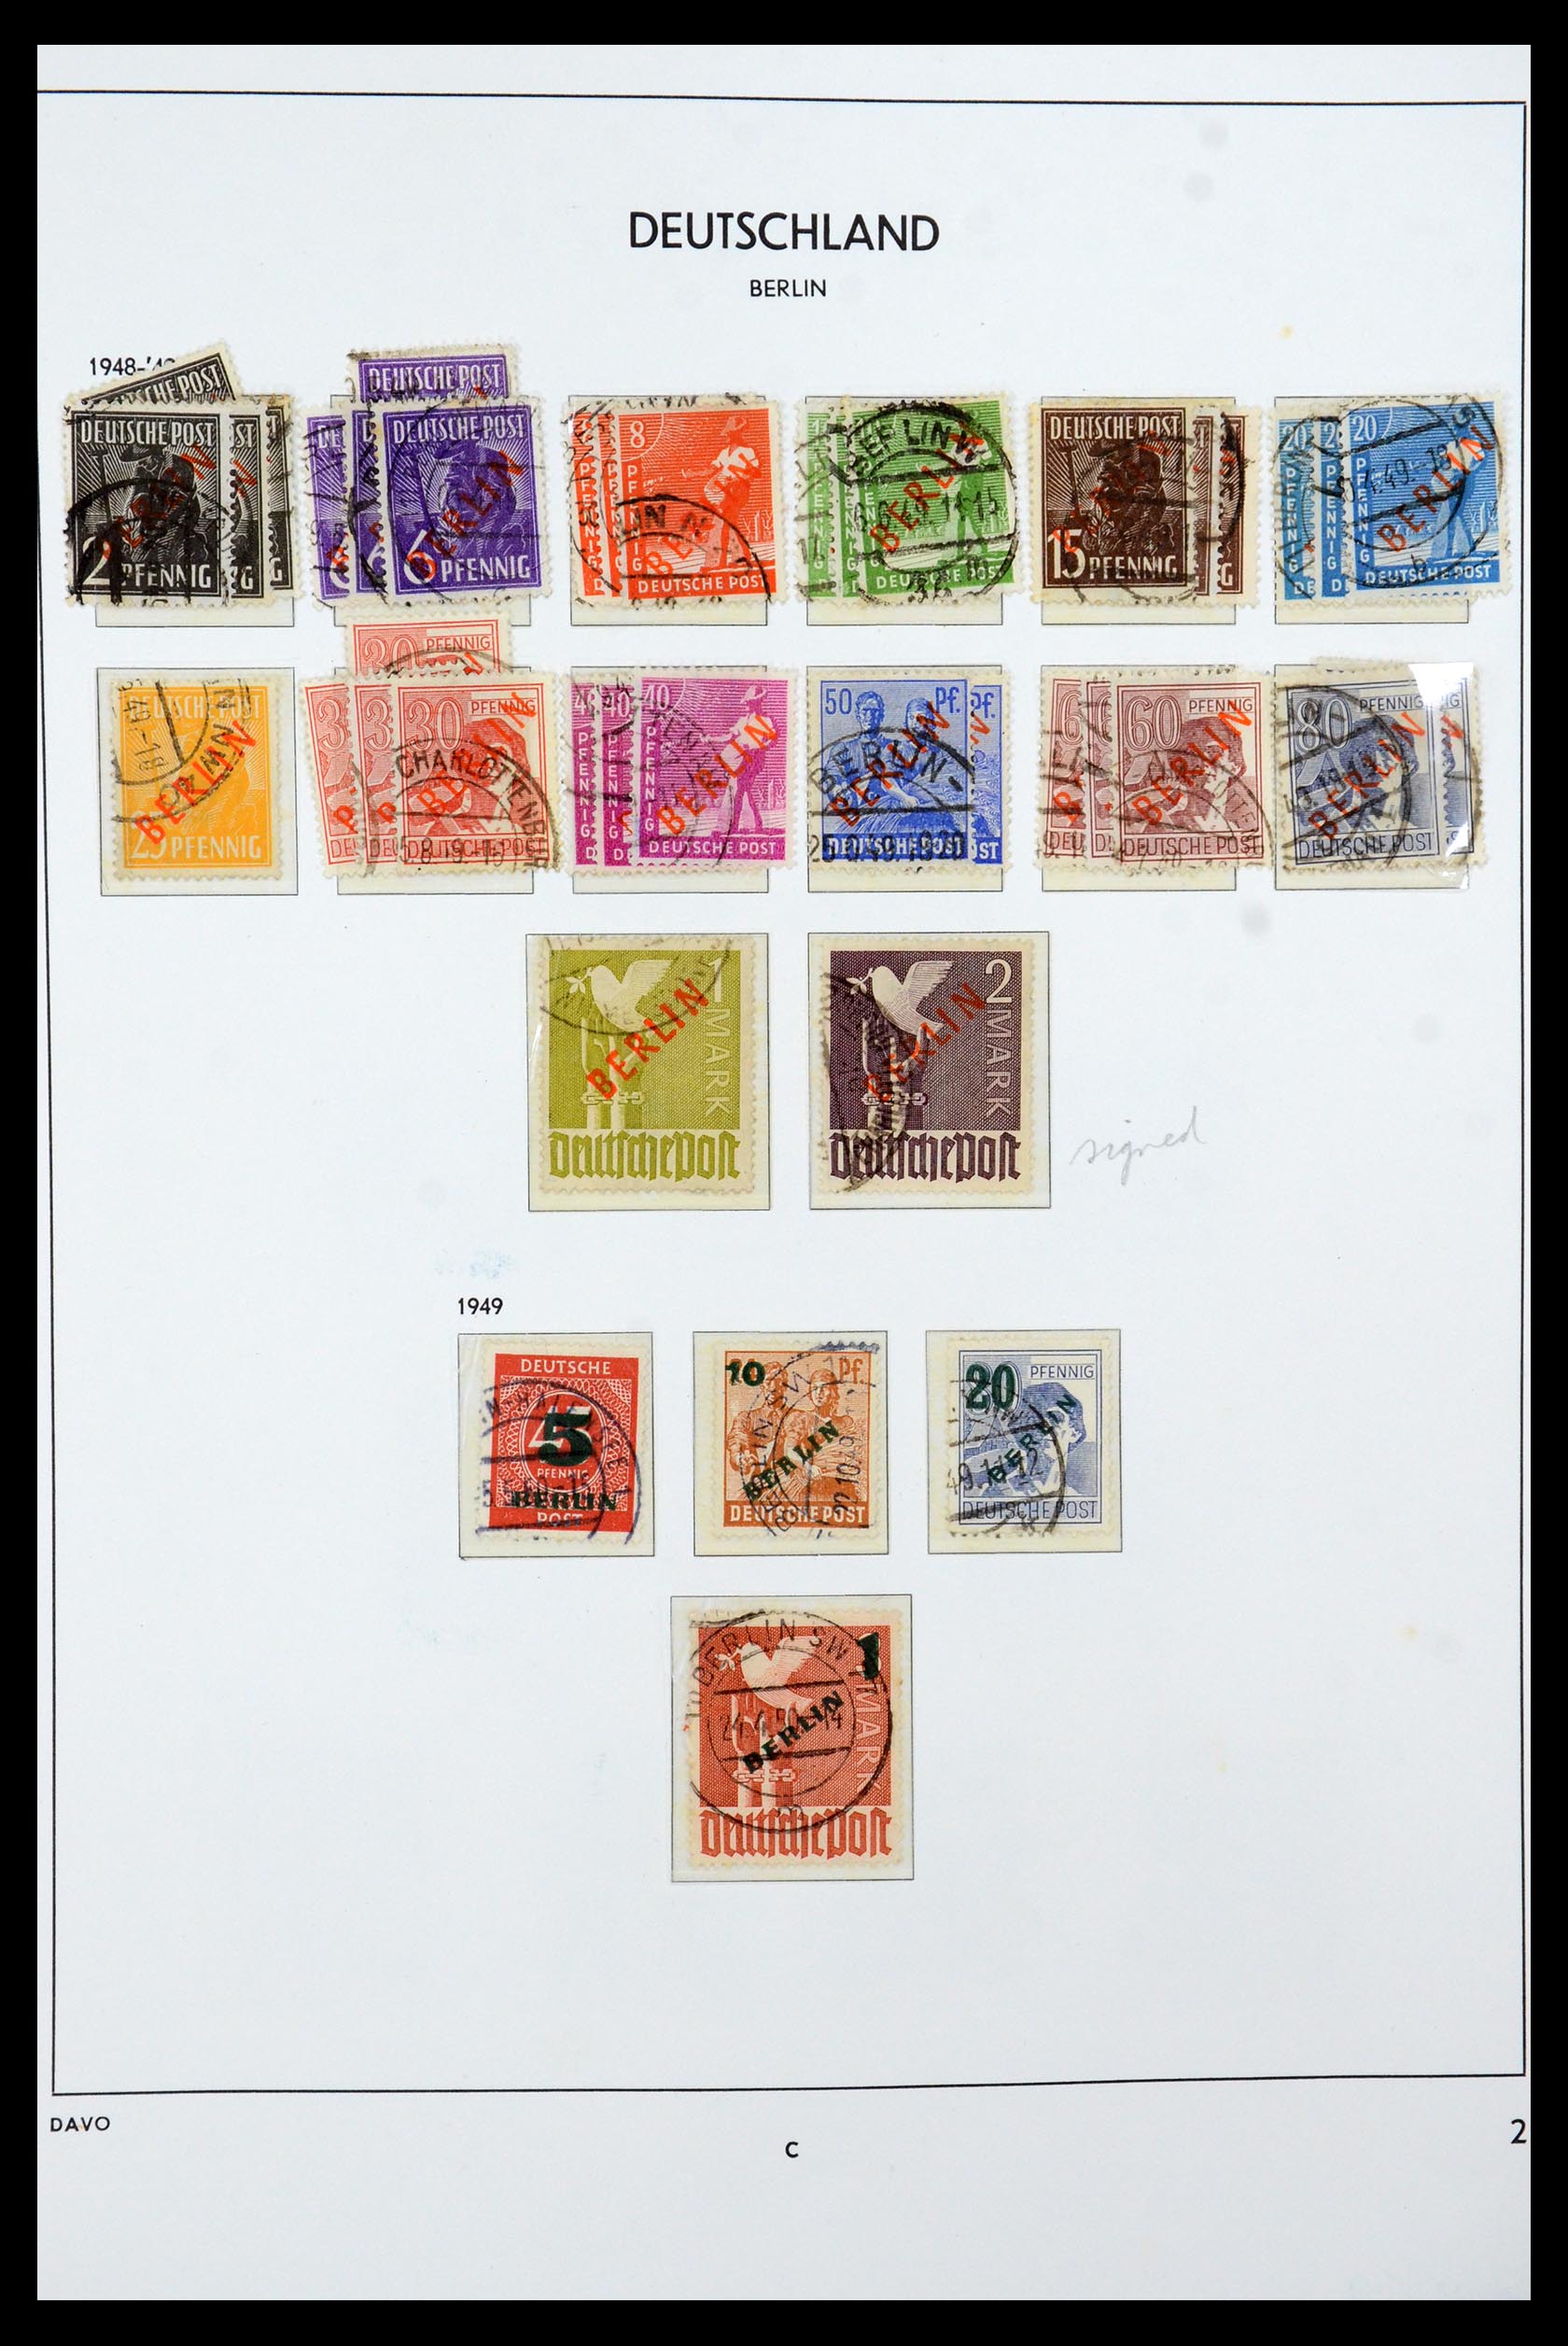 36441 002 - Stamp collection 36441 Berlin 1948-1990.